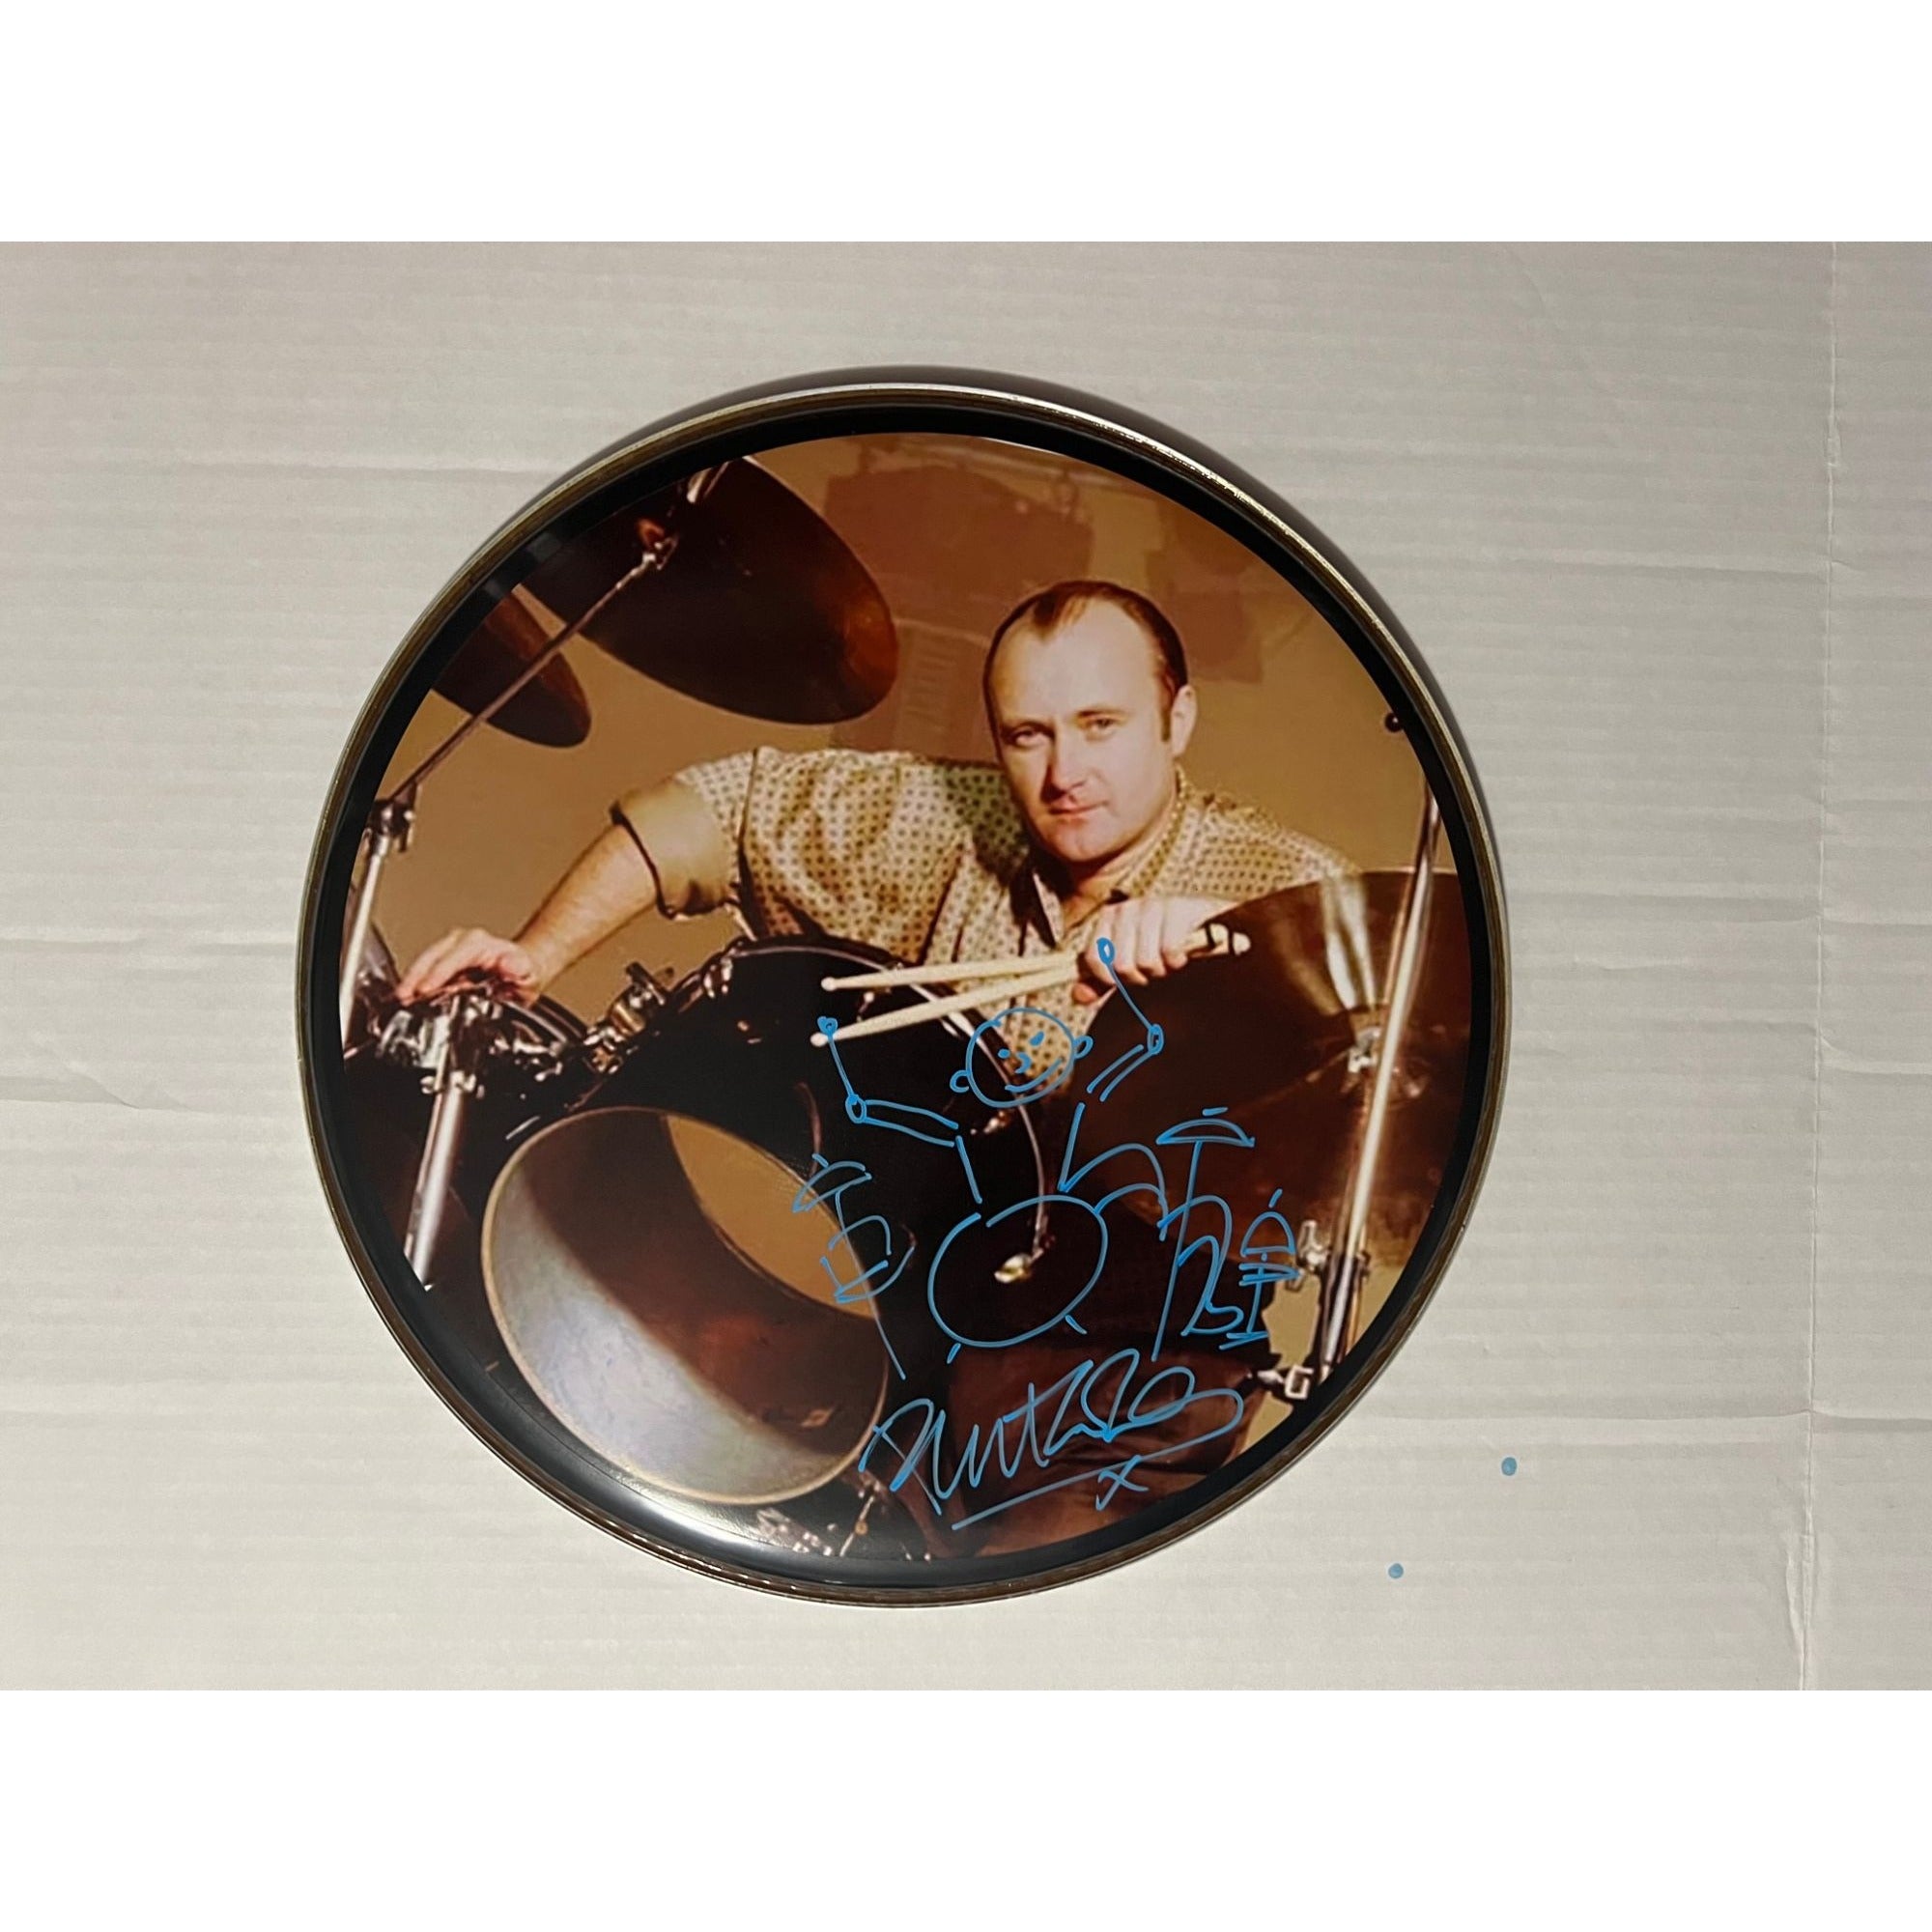 Phil Collins iconic Genesis drummer 14 inch one of a kind drumhead signed with sketch